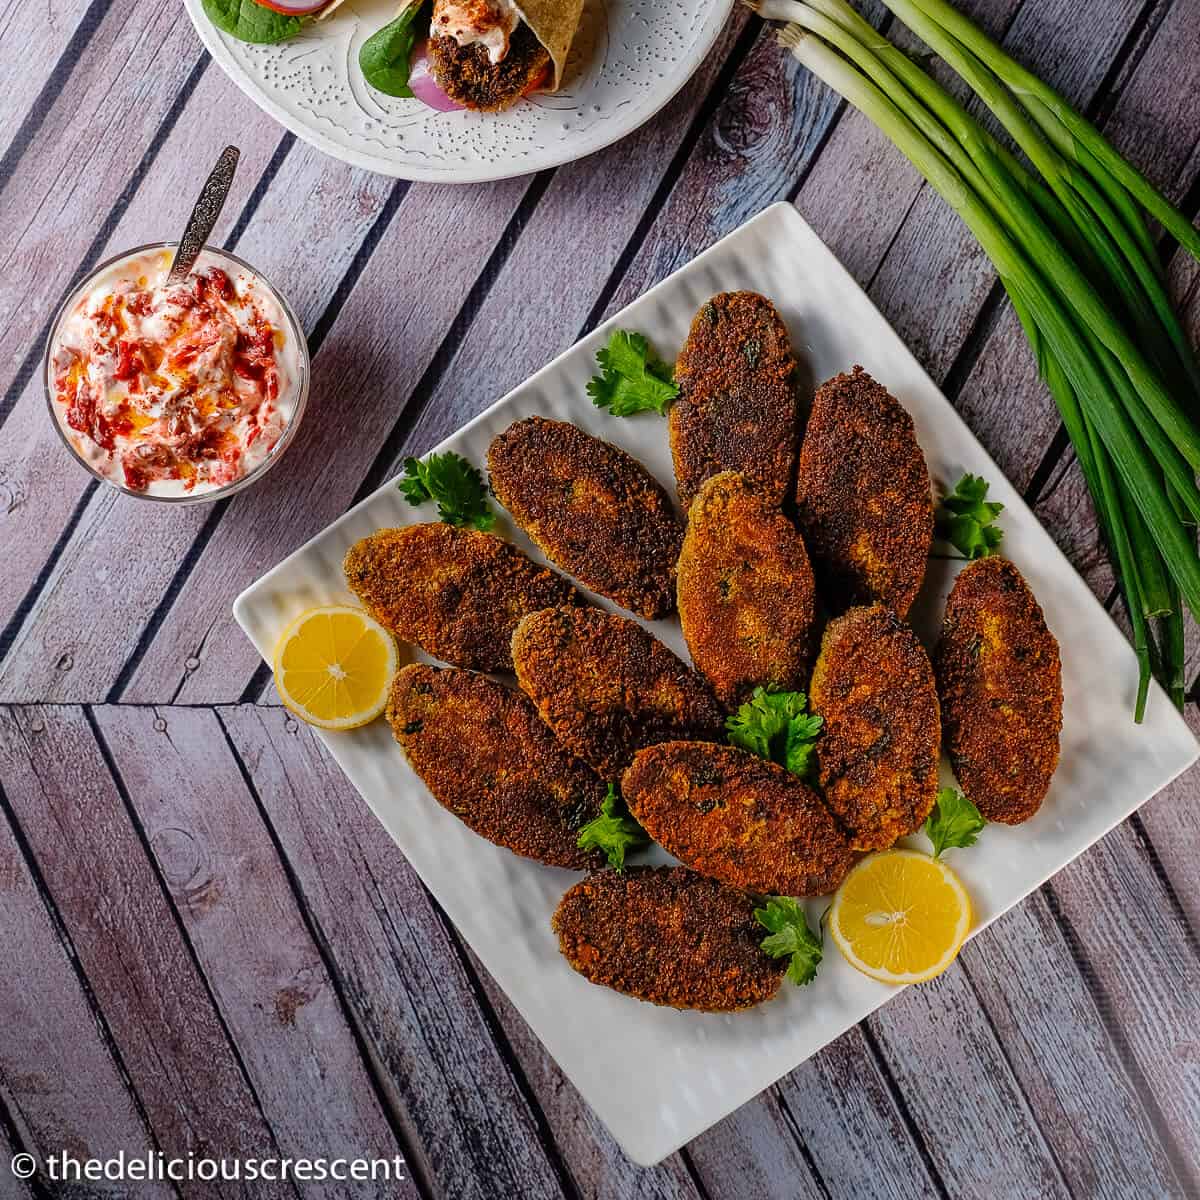 Blog Appetit: South Indian Inspired Fish Cakes and Coconut-Cilantro Chutney  Make Tasty Connection to Kerala's Jewish Past